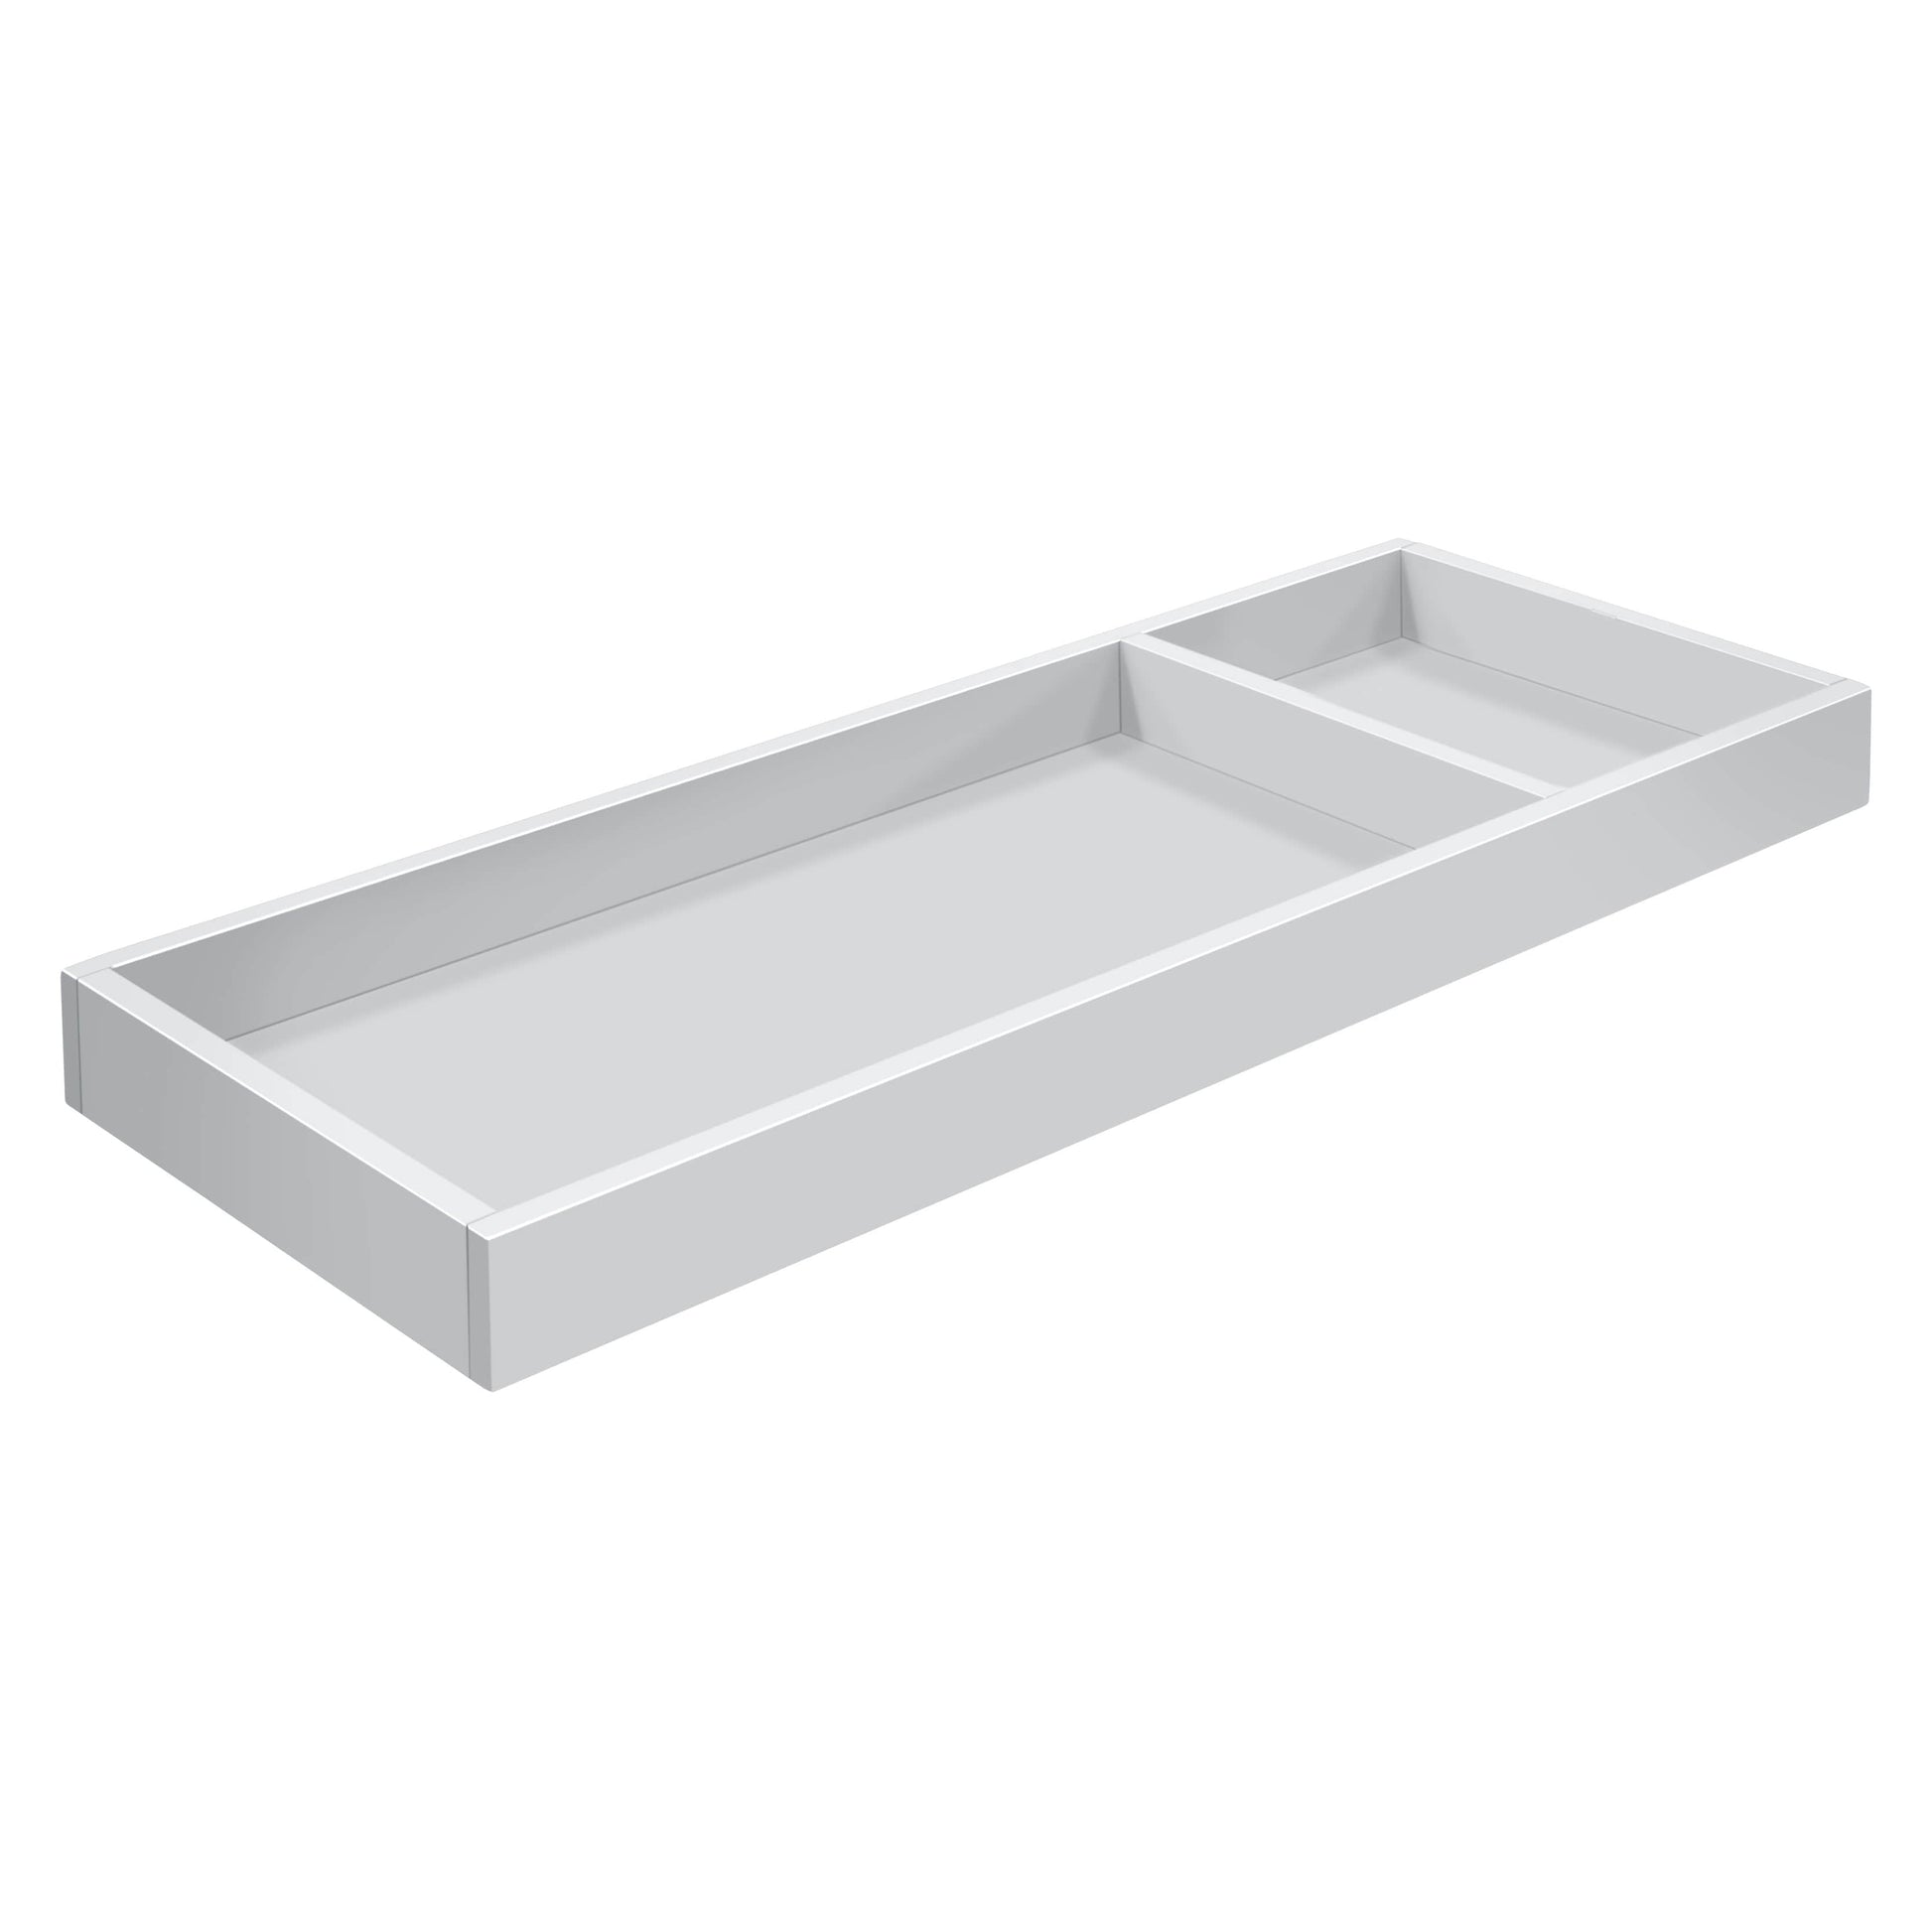 M0619DG,Universal Wide Removable Changing Tray in Cloud Grey